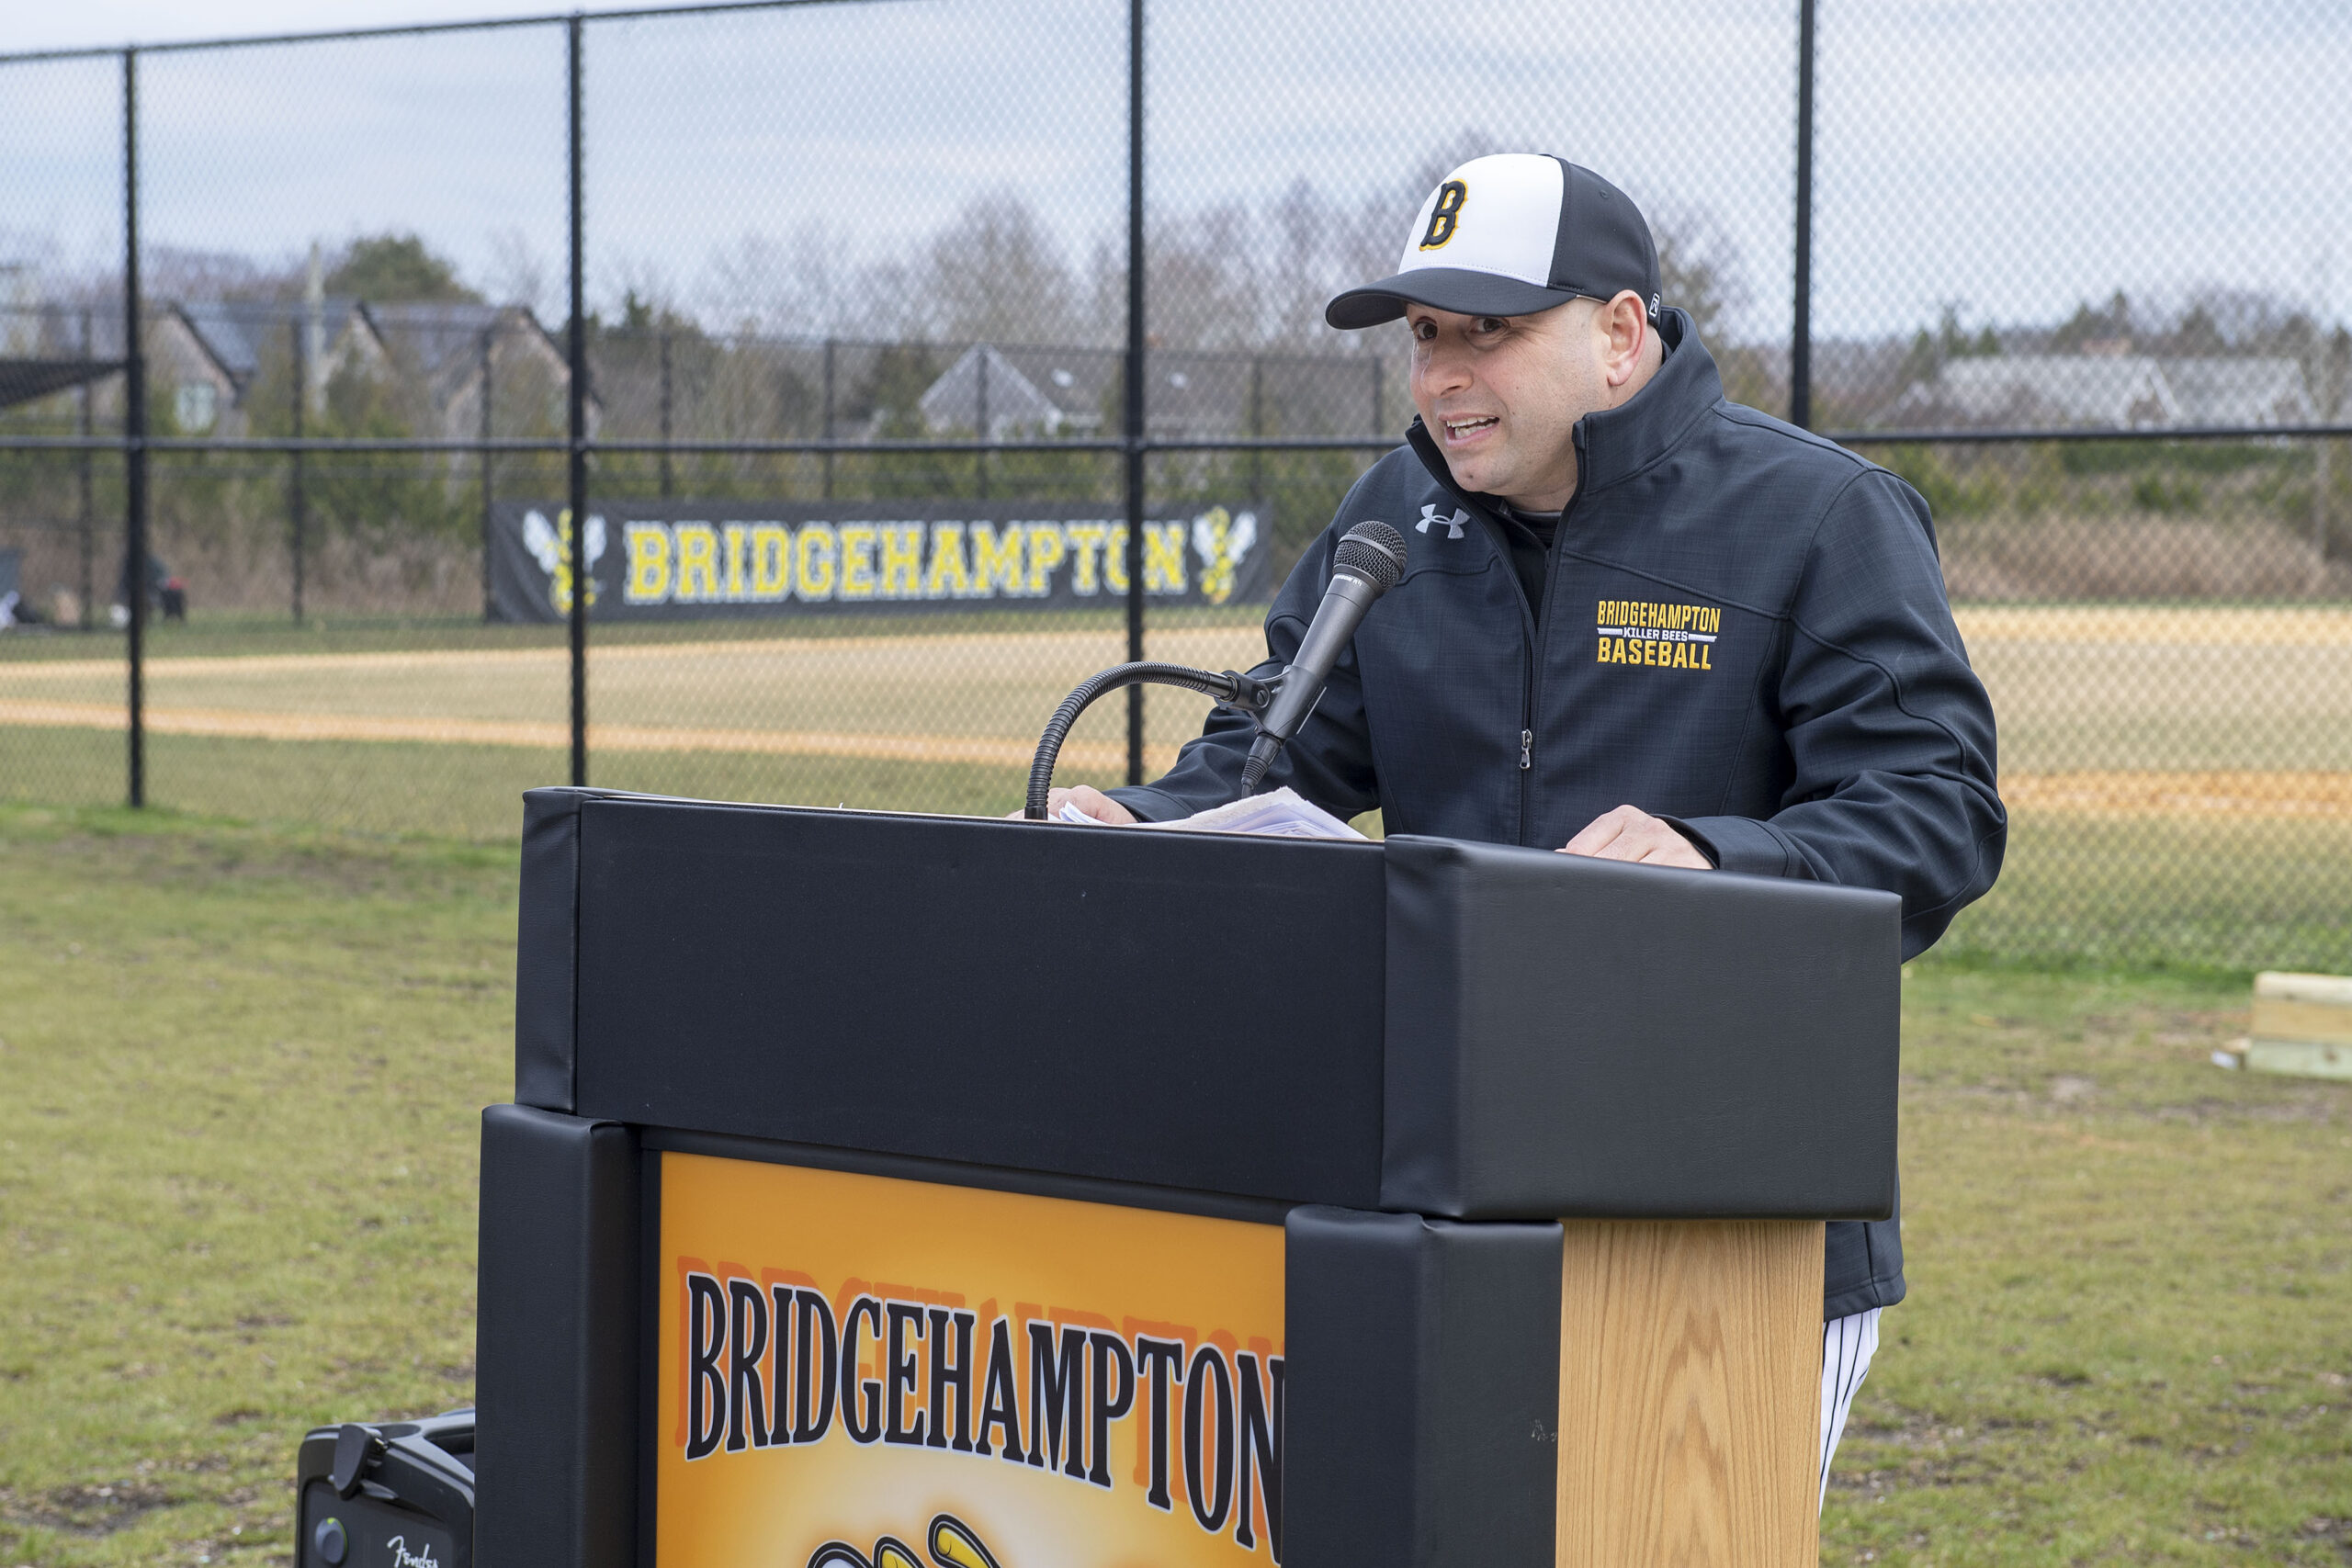 Bridgehampton School Athletic Director Mike DeRosa addresses the crowd during a dedication ceremony prior to the start of the baseball game between the Bridgehampton Killer Bees and the Shelter Island Islanders on Tuesday.   MICHAEL HELLER